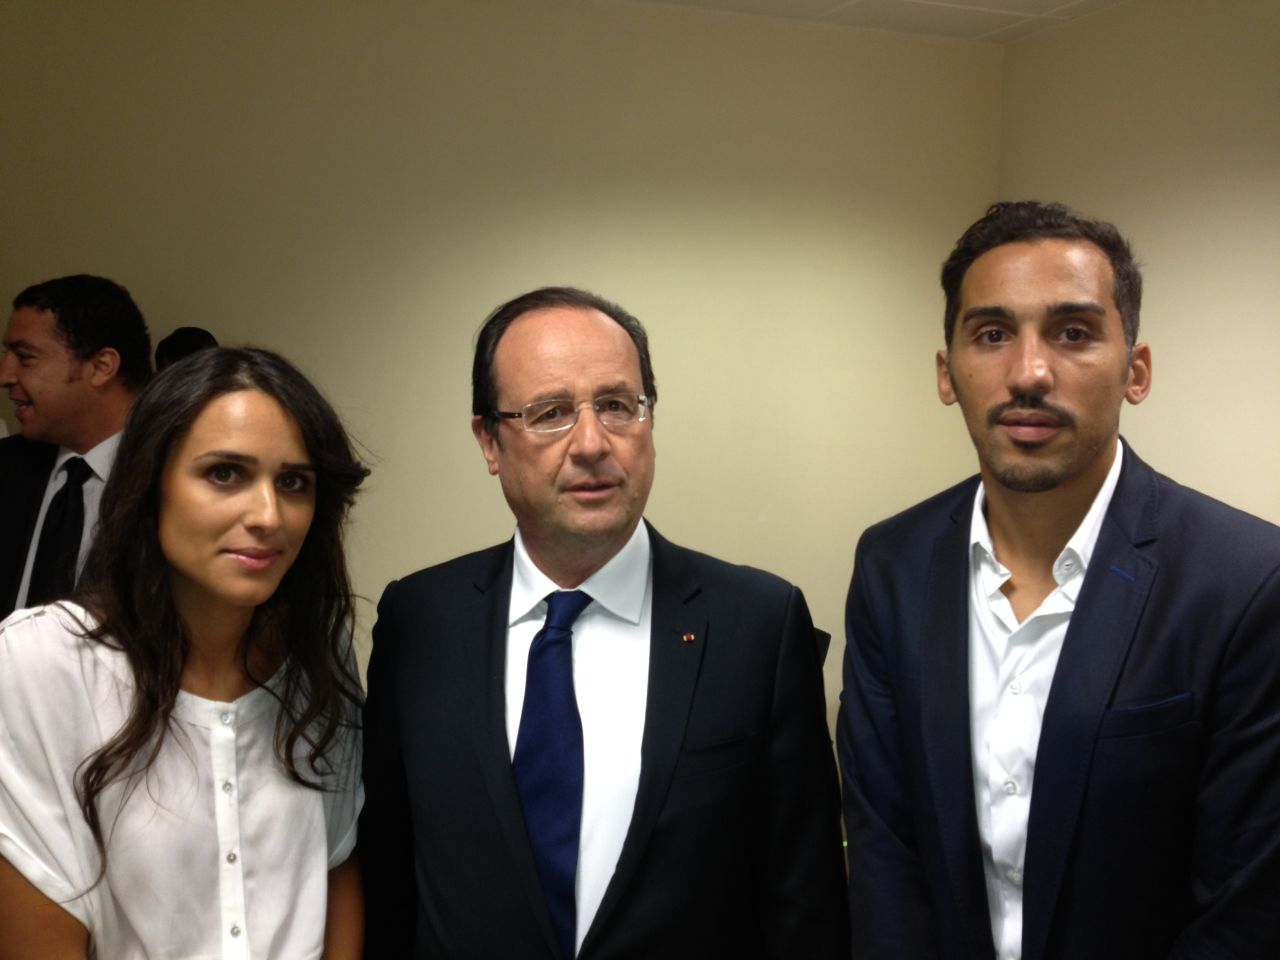 Belounis (right) held talks with French President Francois Hollande during his struggle to gain an exit permit to leave Qatar.